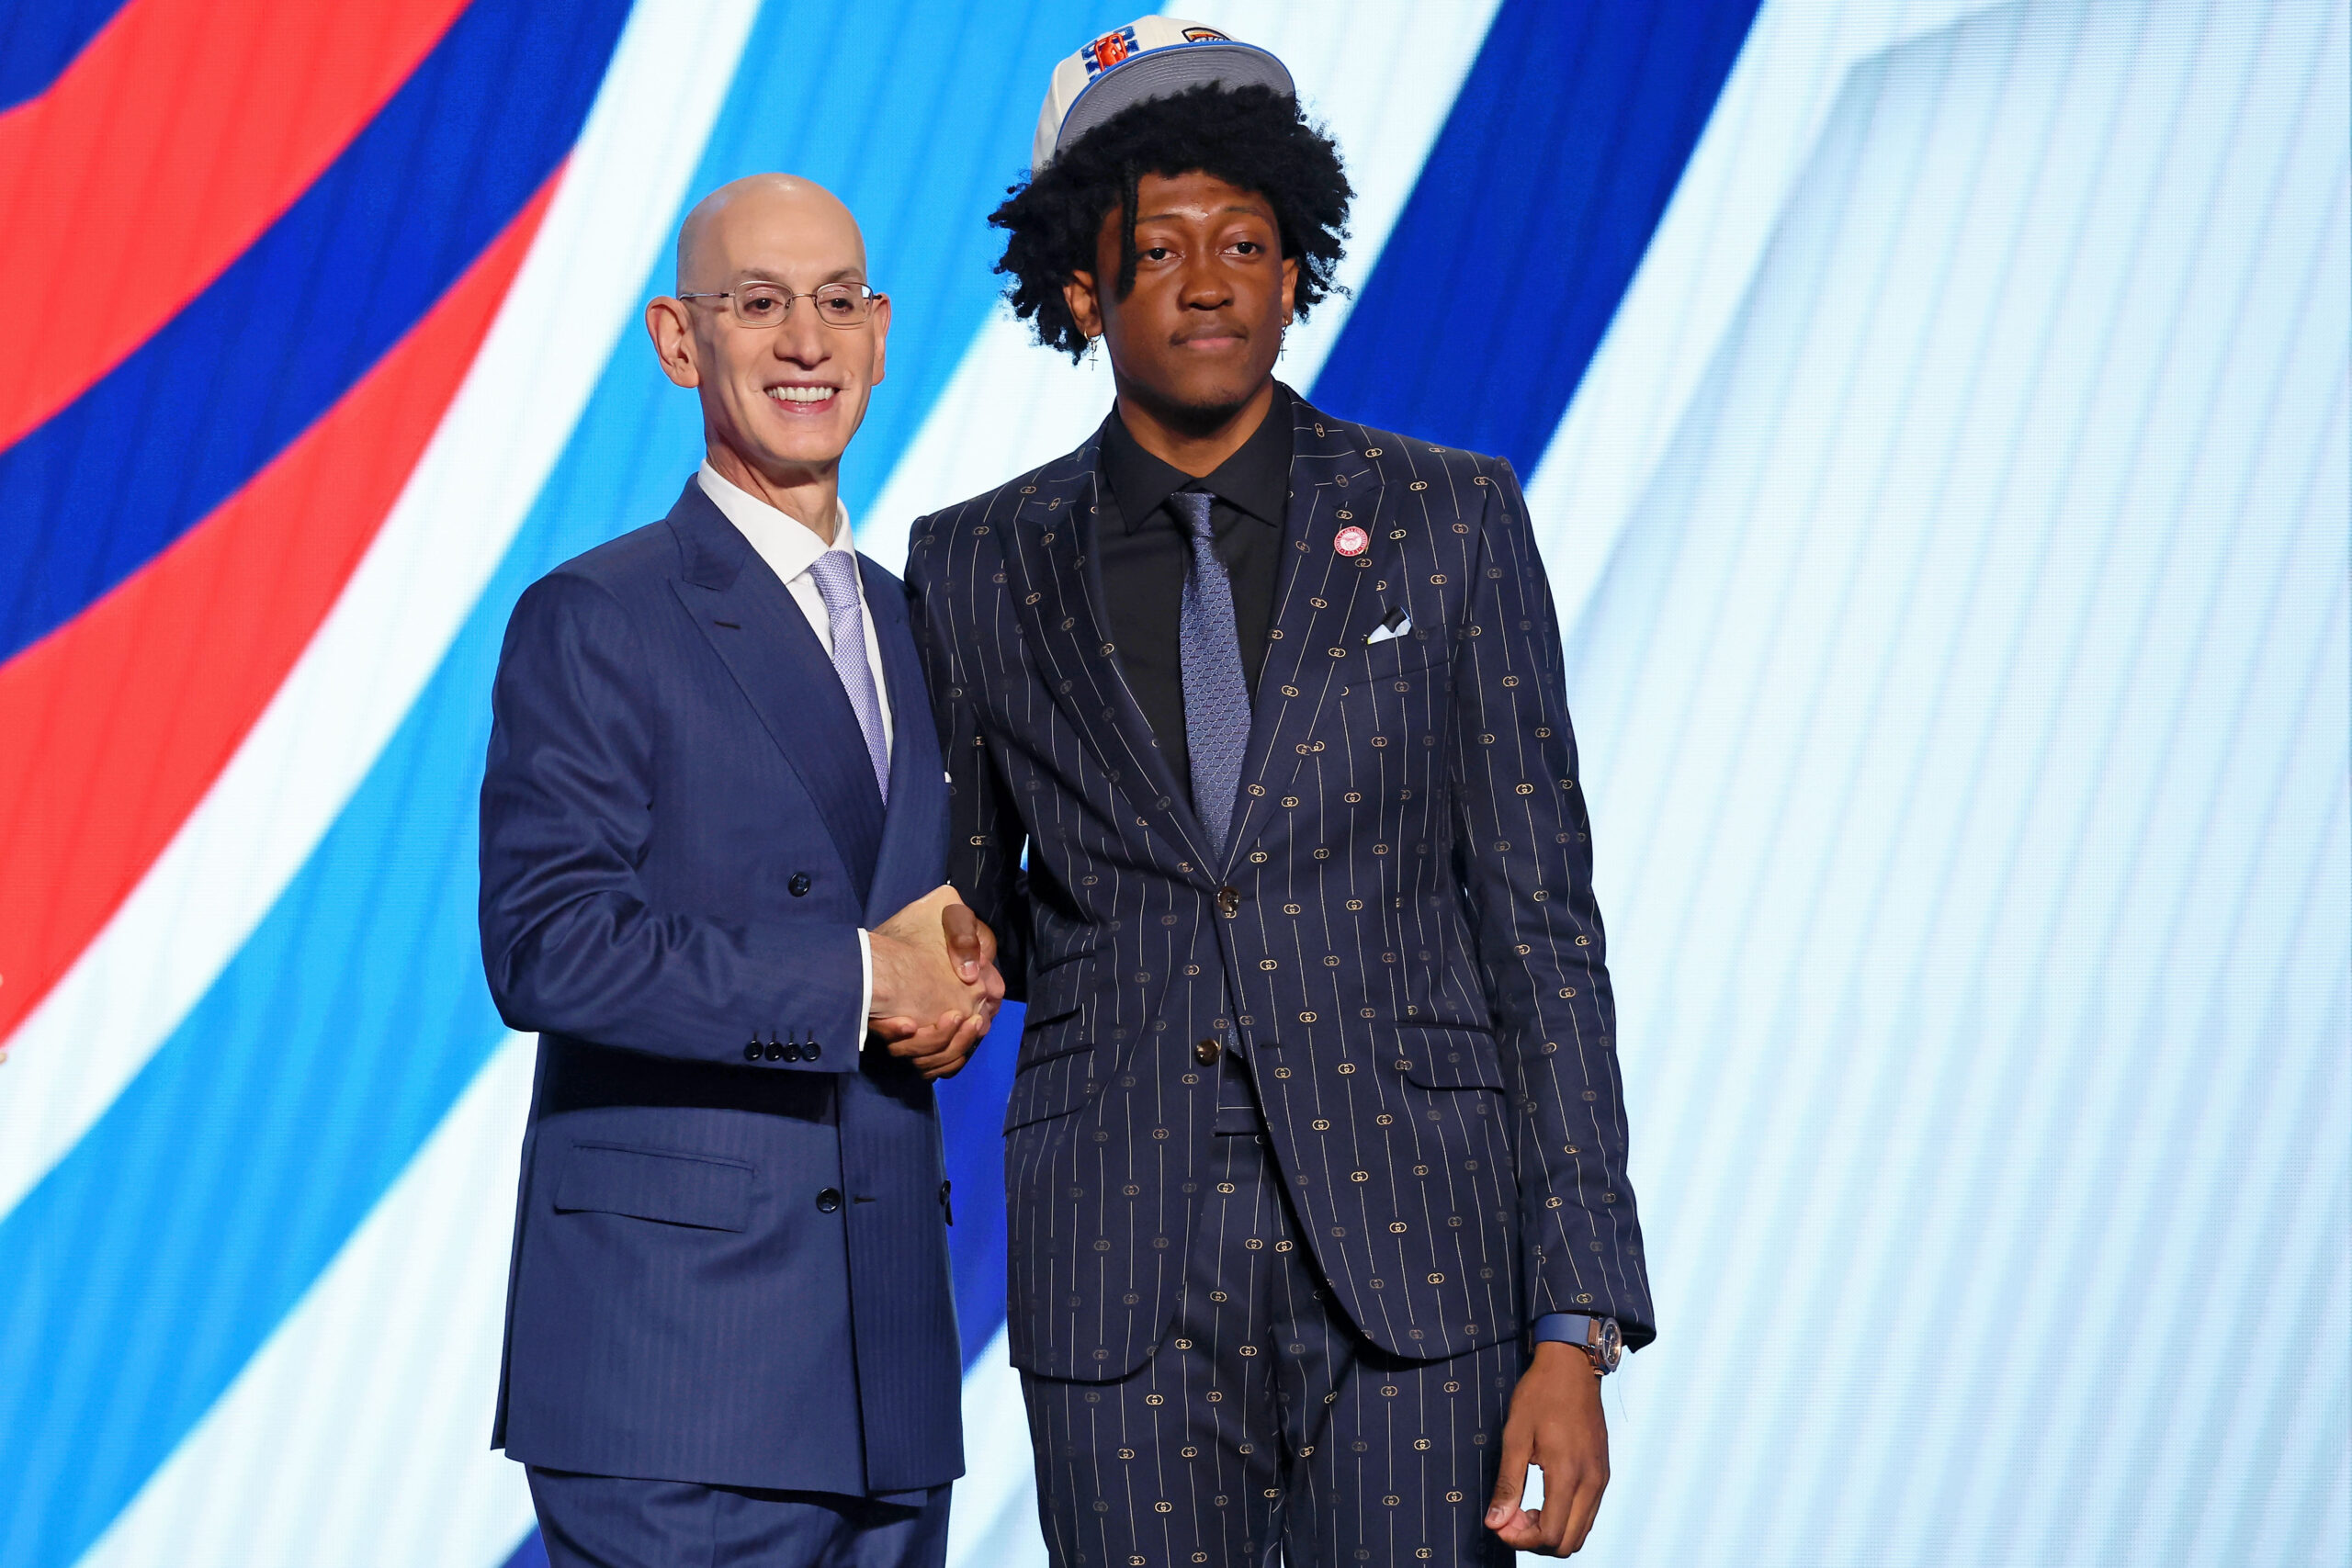 OKC Thunder officially owns 12th-best odds for 2023 NBA draft lottery